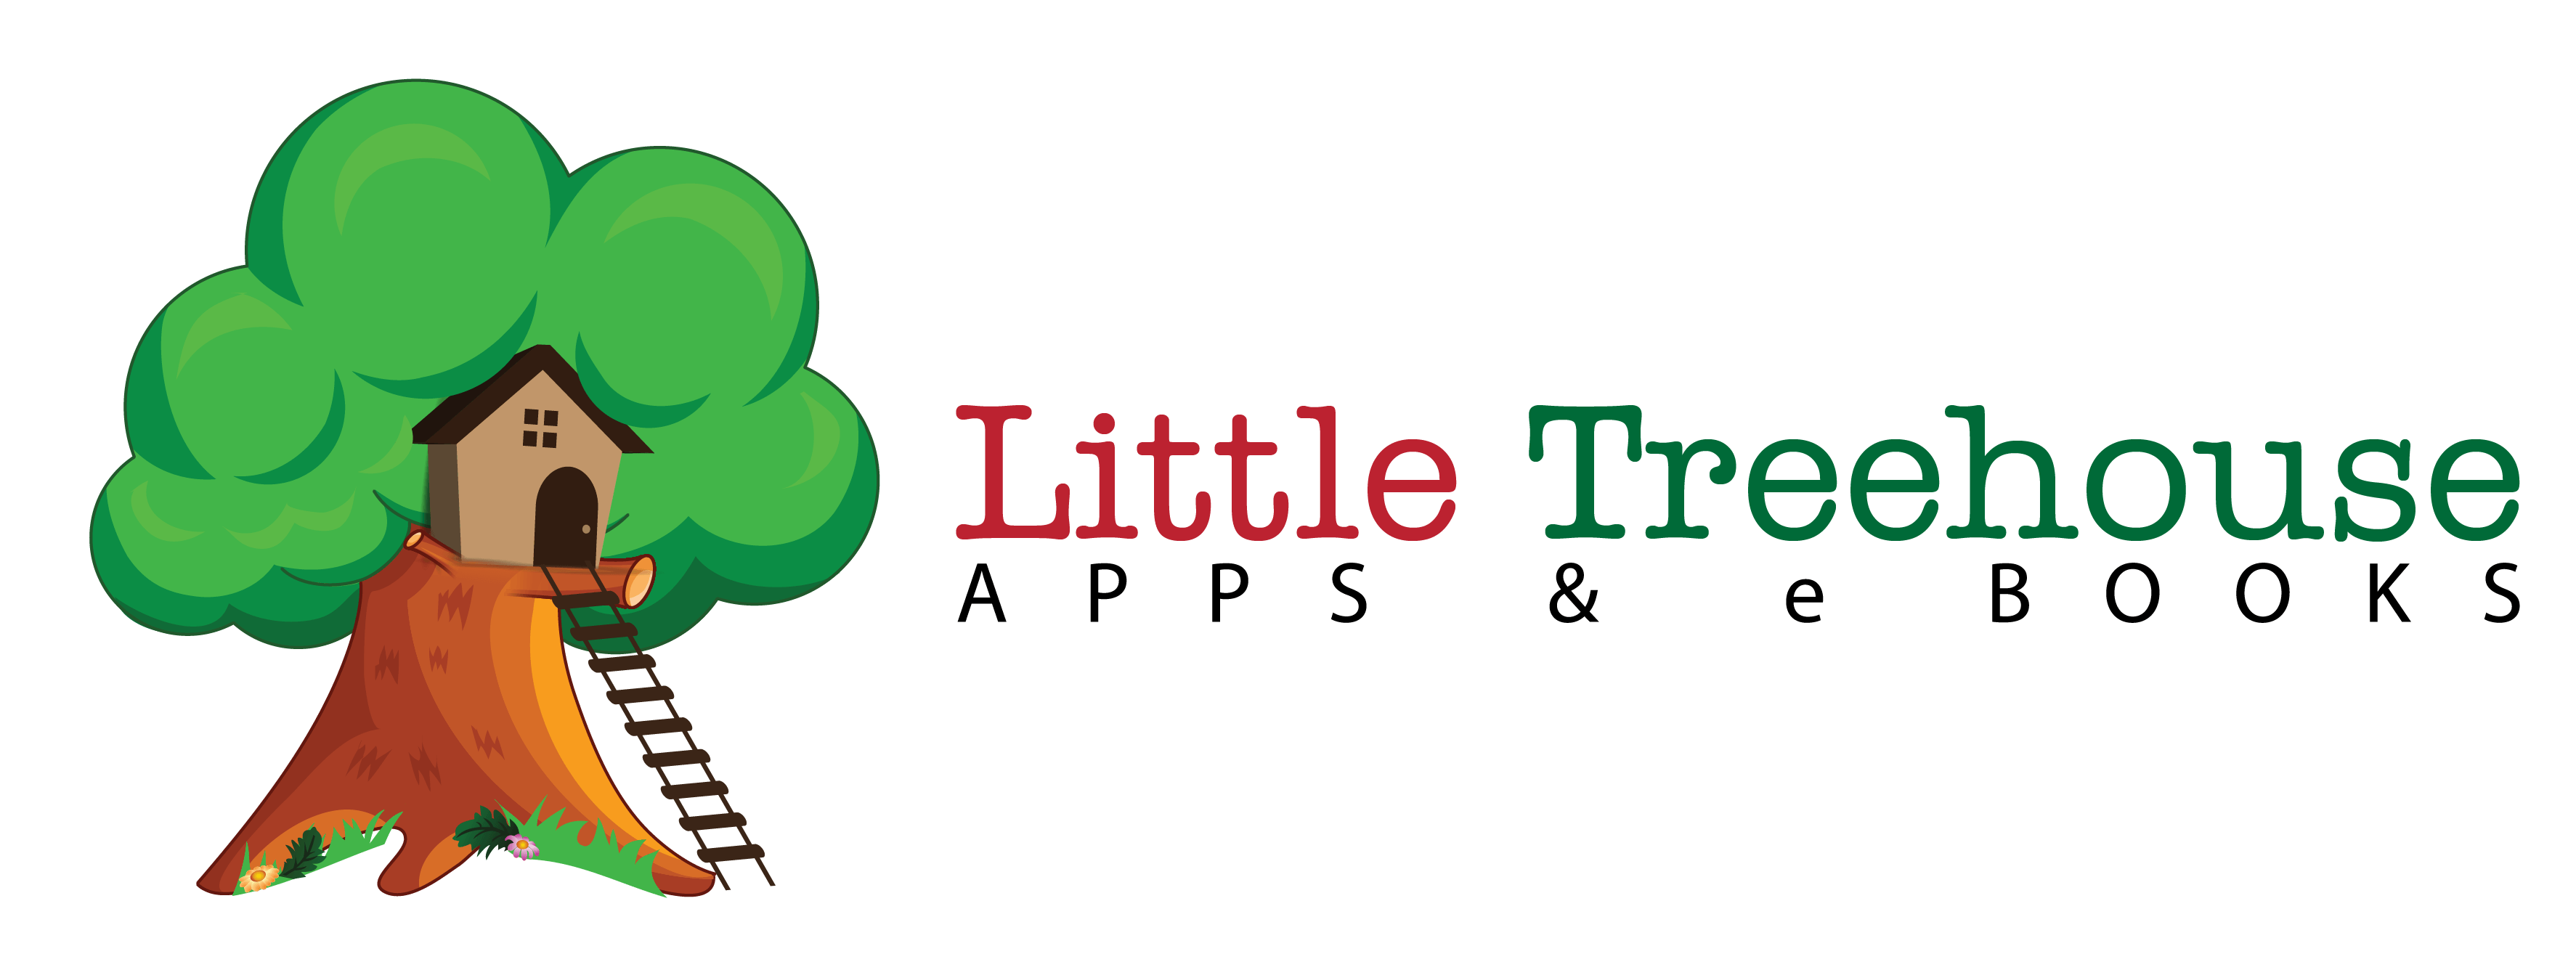 Little Treehouse Apps & Games